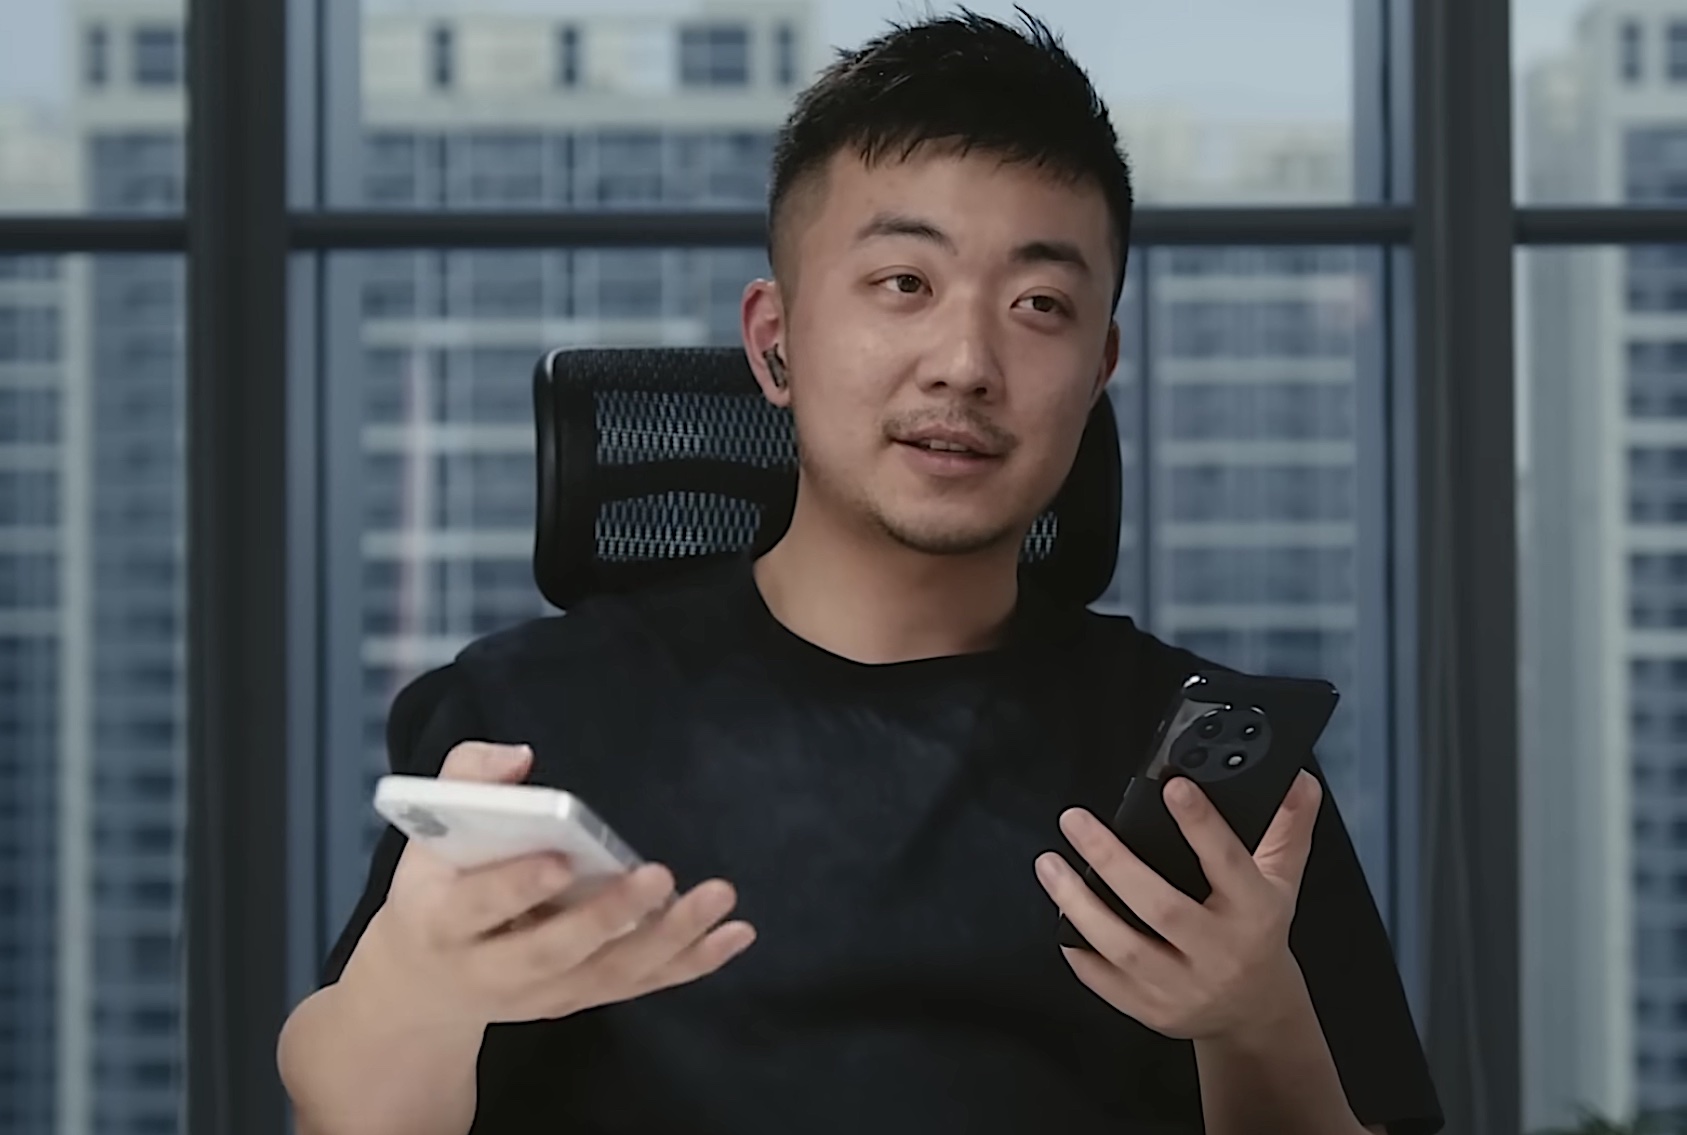 "Premium design, but without identity": former OnePlus CEO Carl Pei assesses the OnePlus 11 flagship